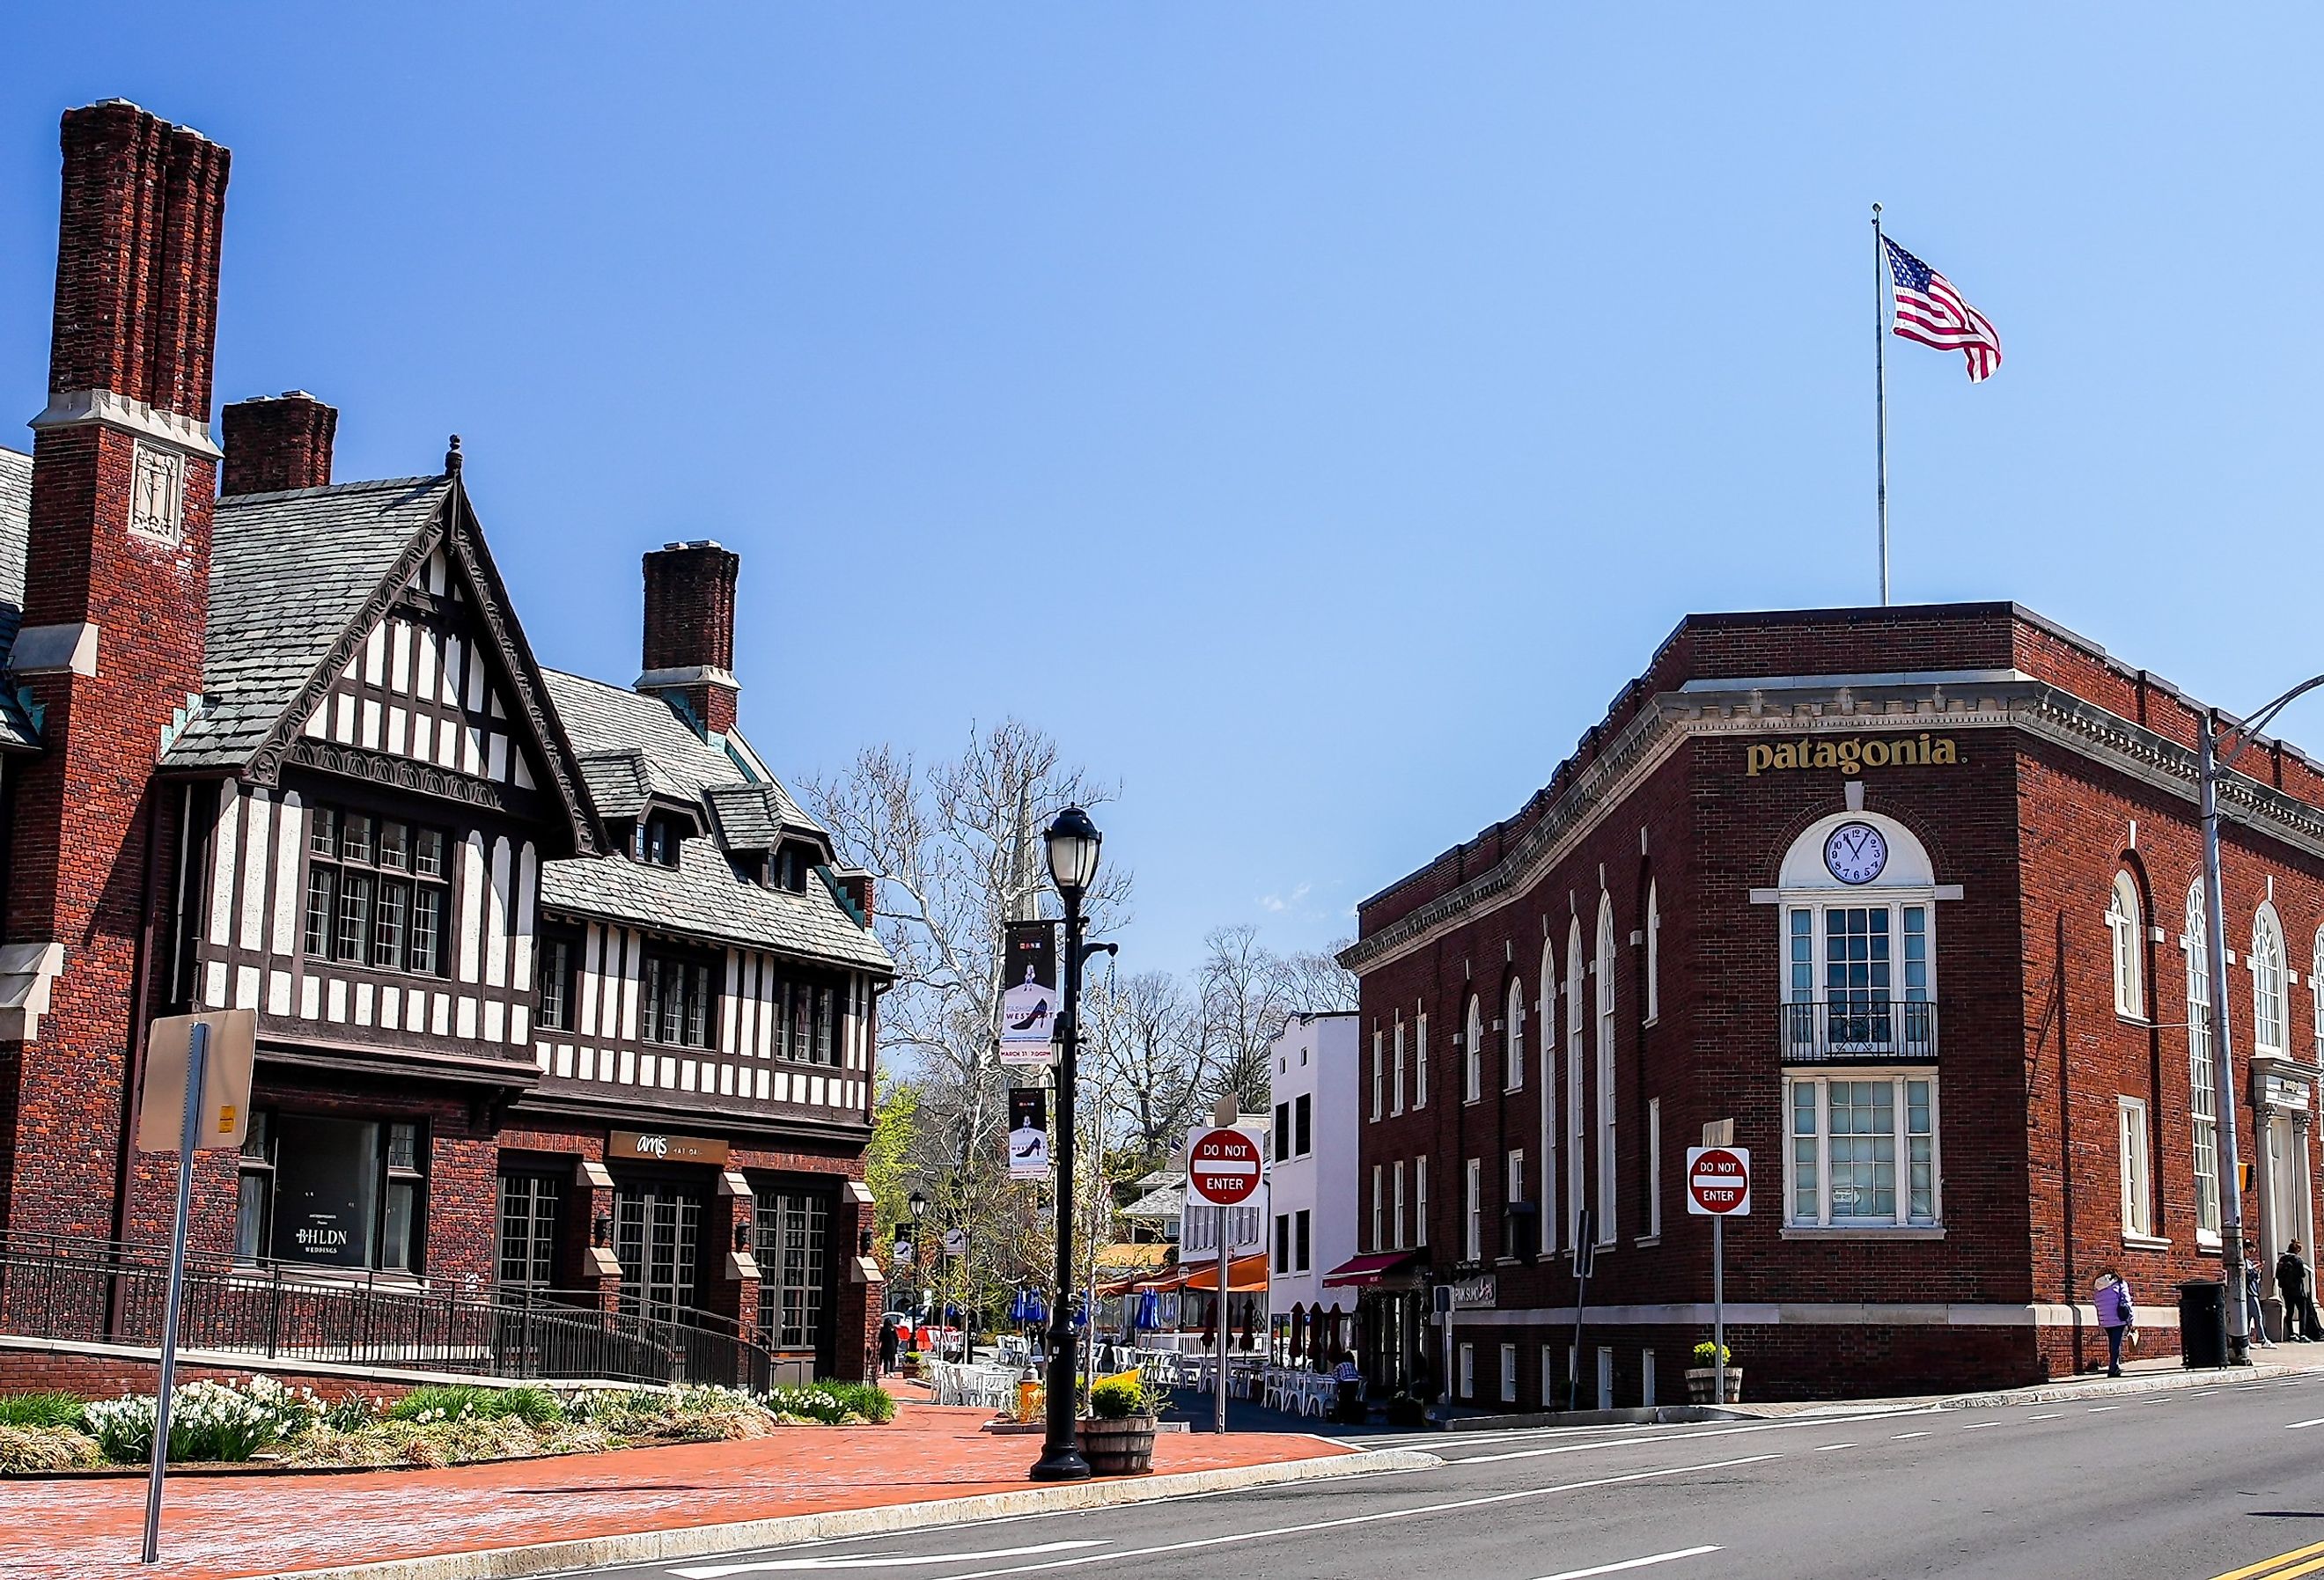 Church Lane on a beautiful spring day with Patagonia store and Anthropologie store in Westport, Connecticut. Image credit Miro Vrlik Photography via Shutterstock